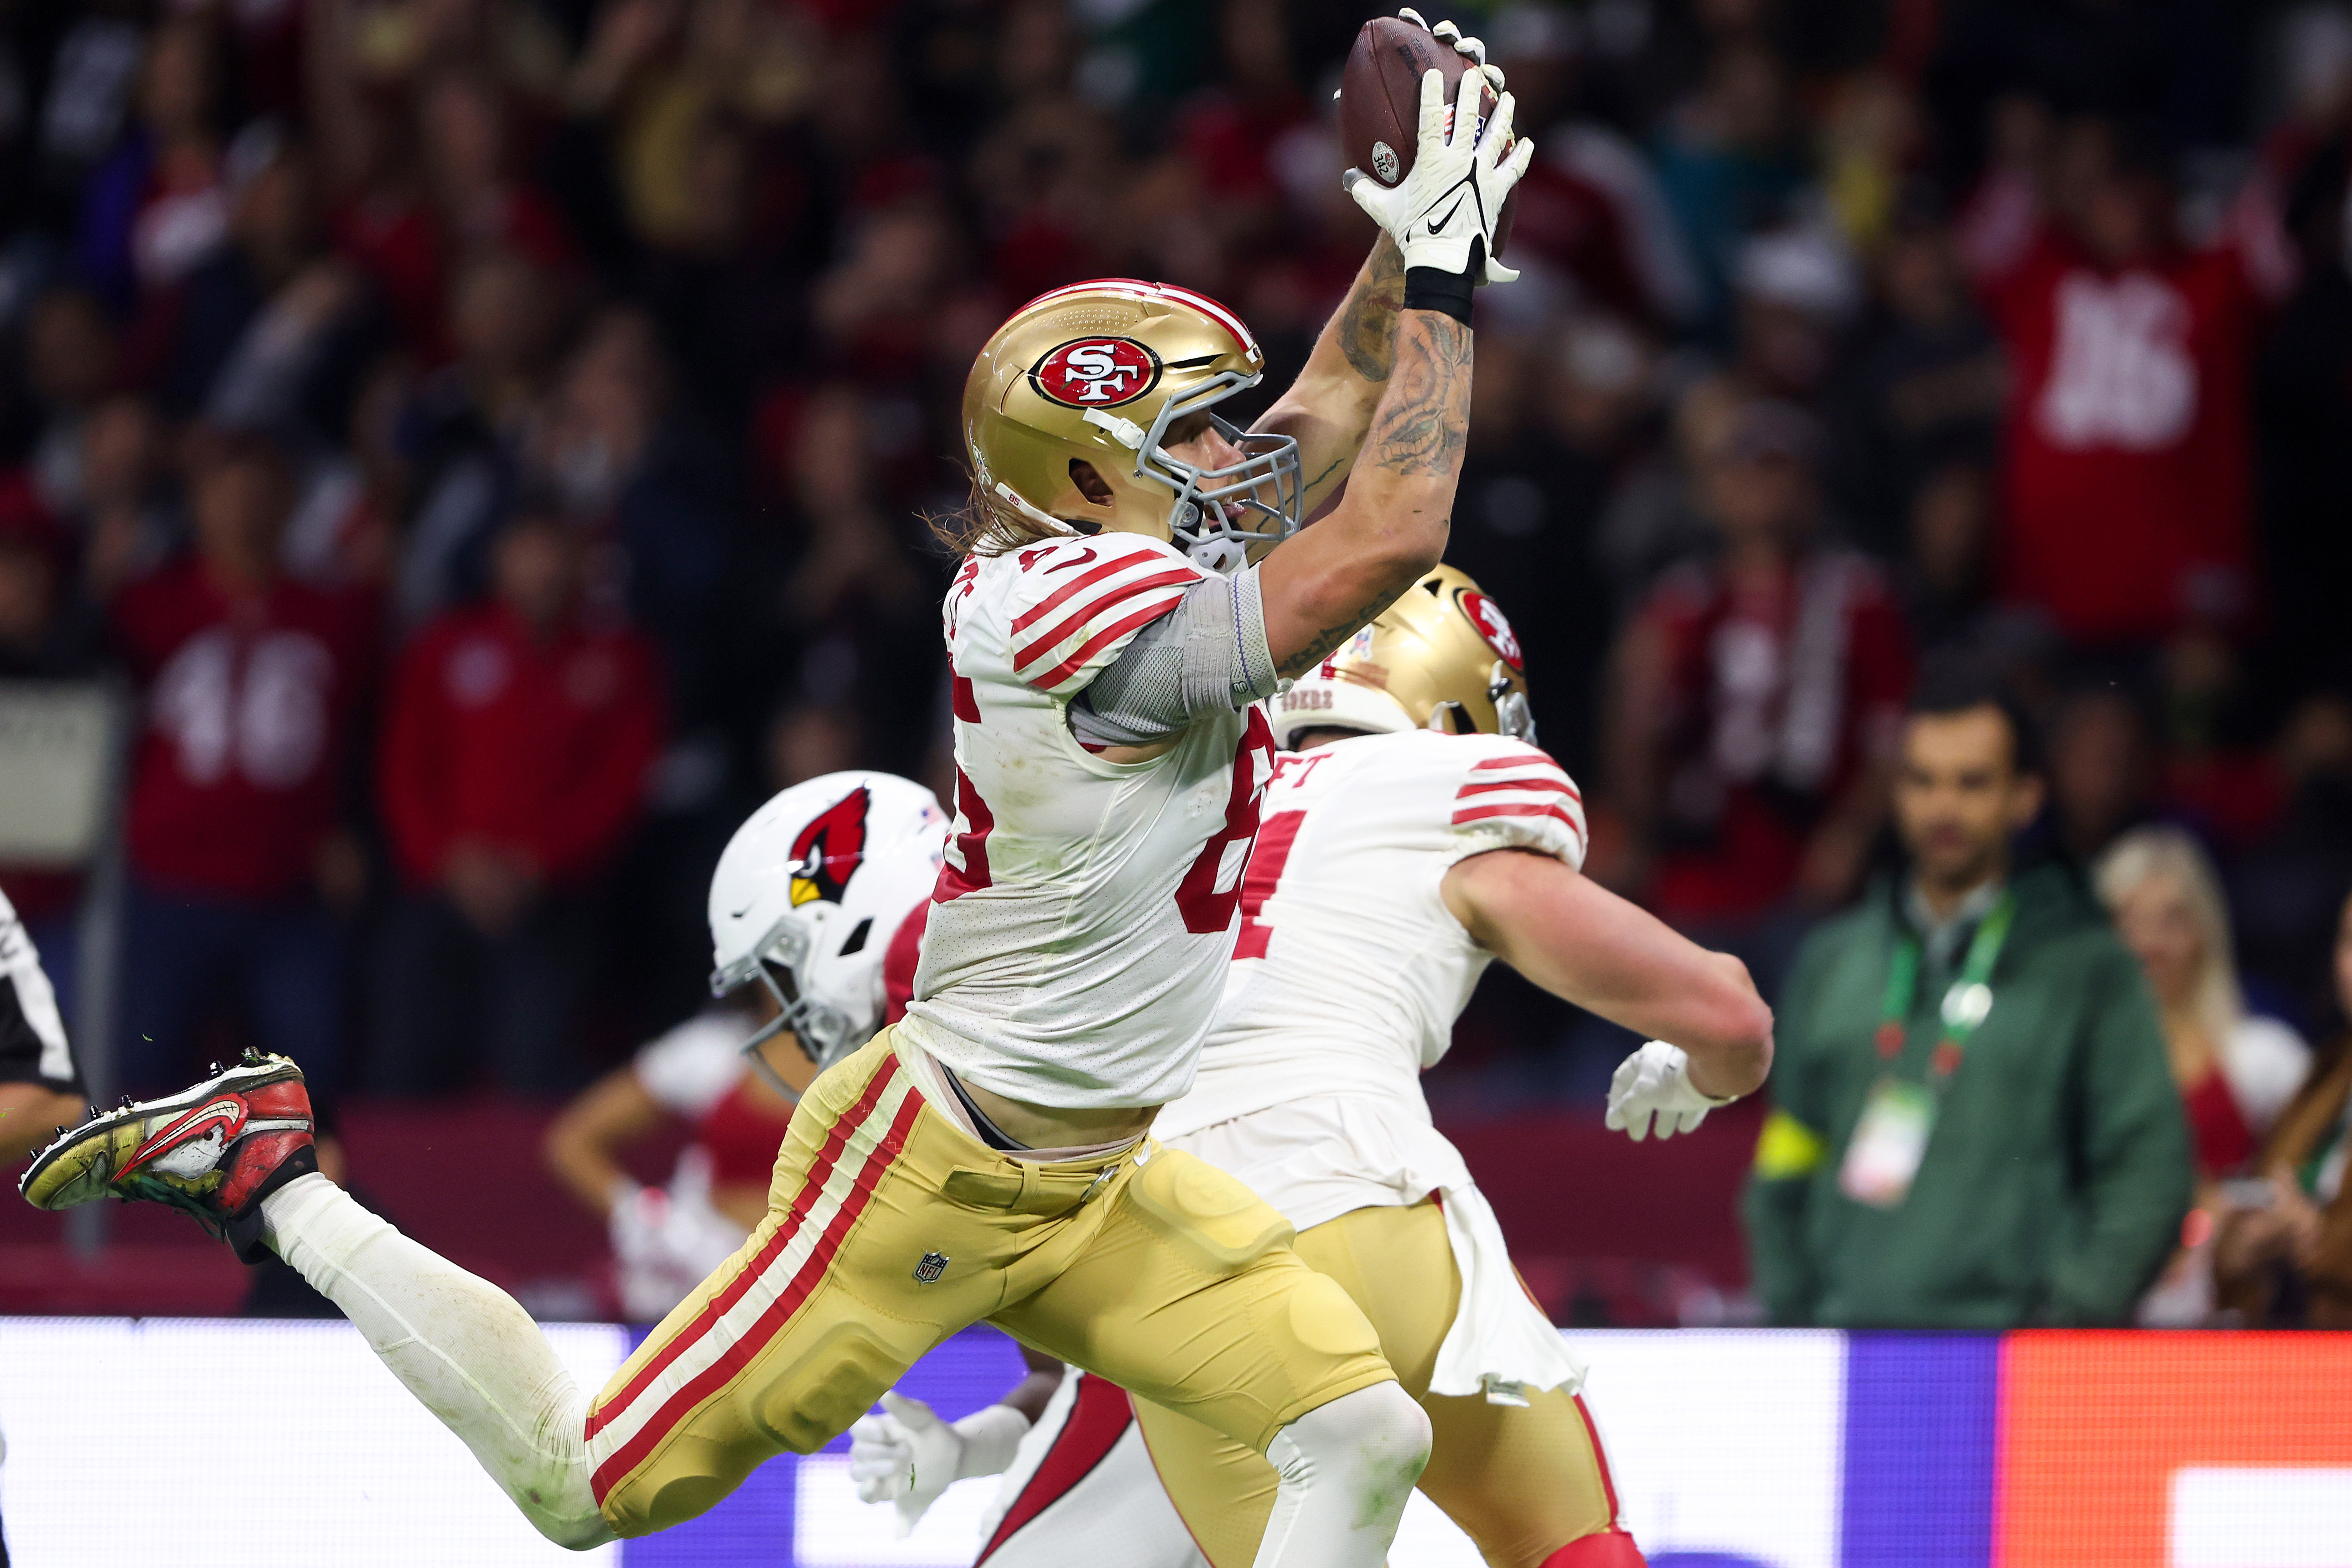 Tight end George Kittle (C) of the San Francisco 49ers receives the ball to score a touchdown in the game against the Arizona Cardinals at Estadio Azteca in Mexico City, Mexico, November 21, 2022. /CFP